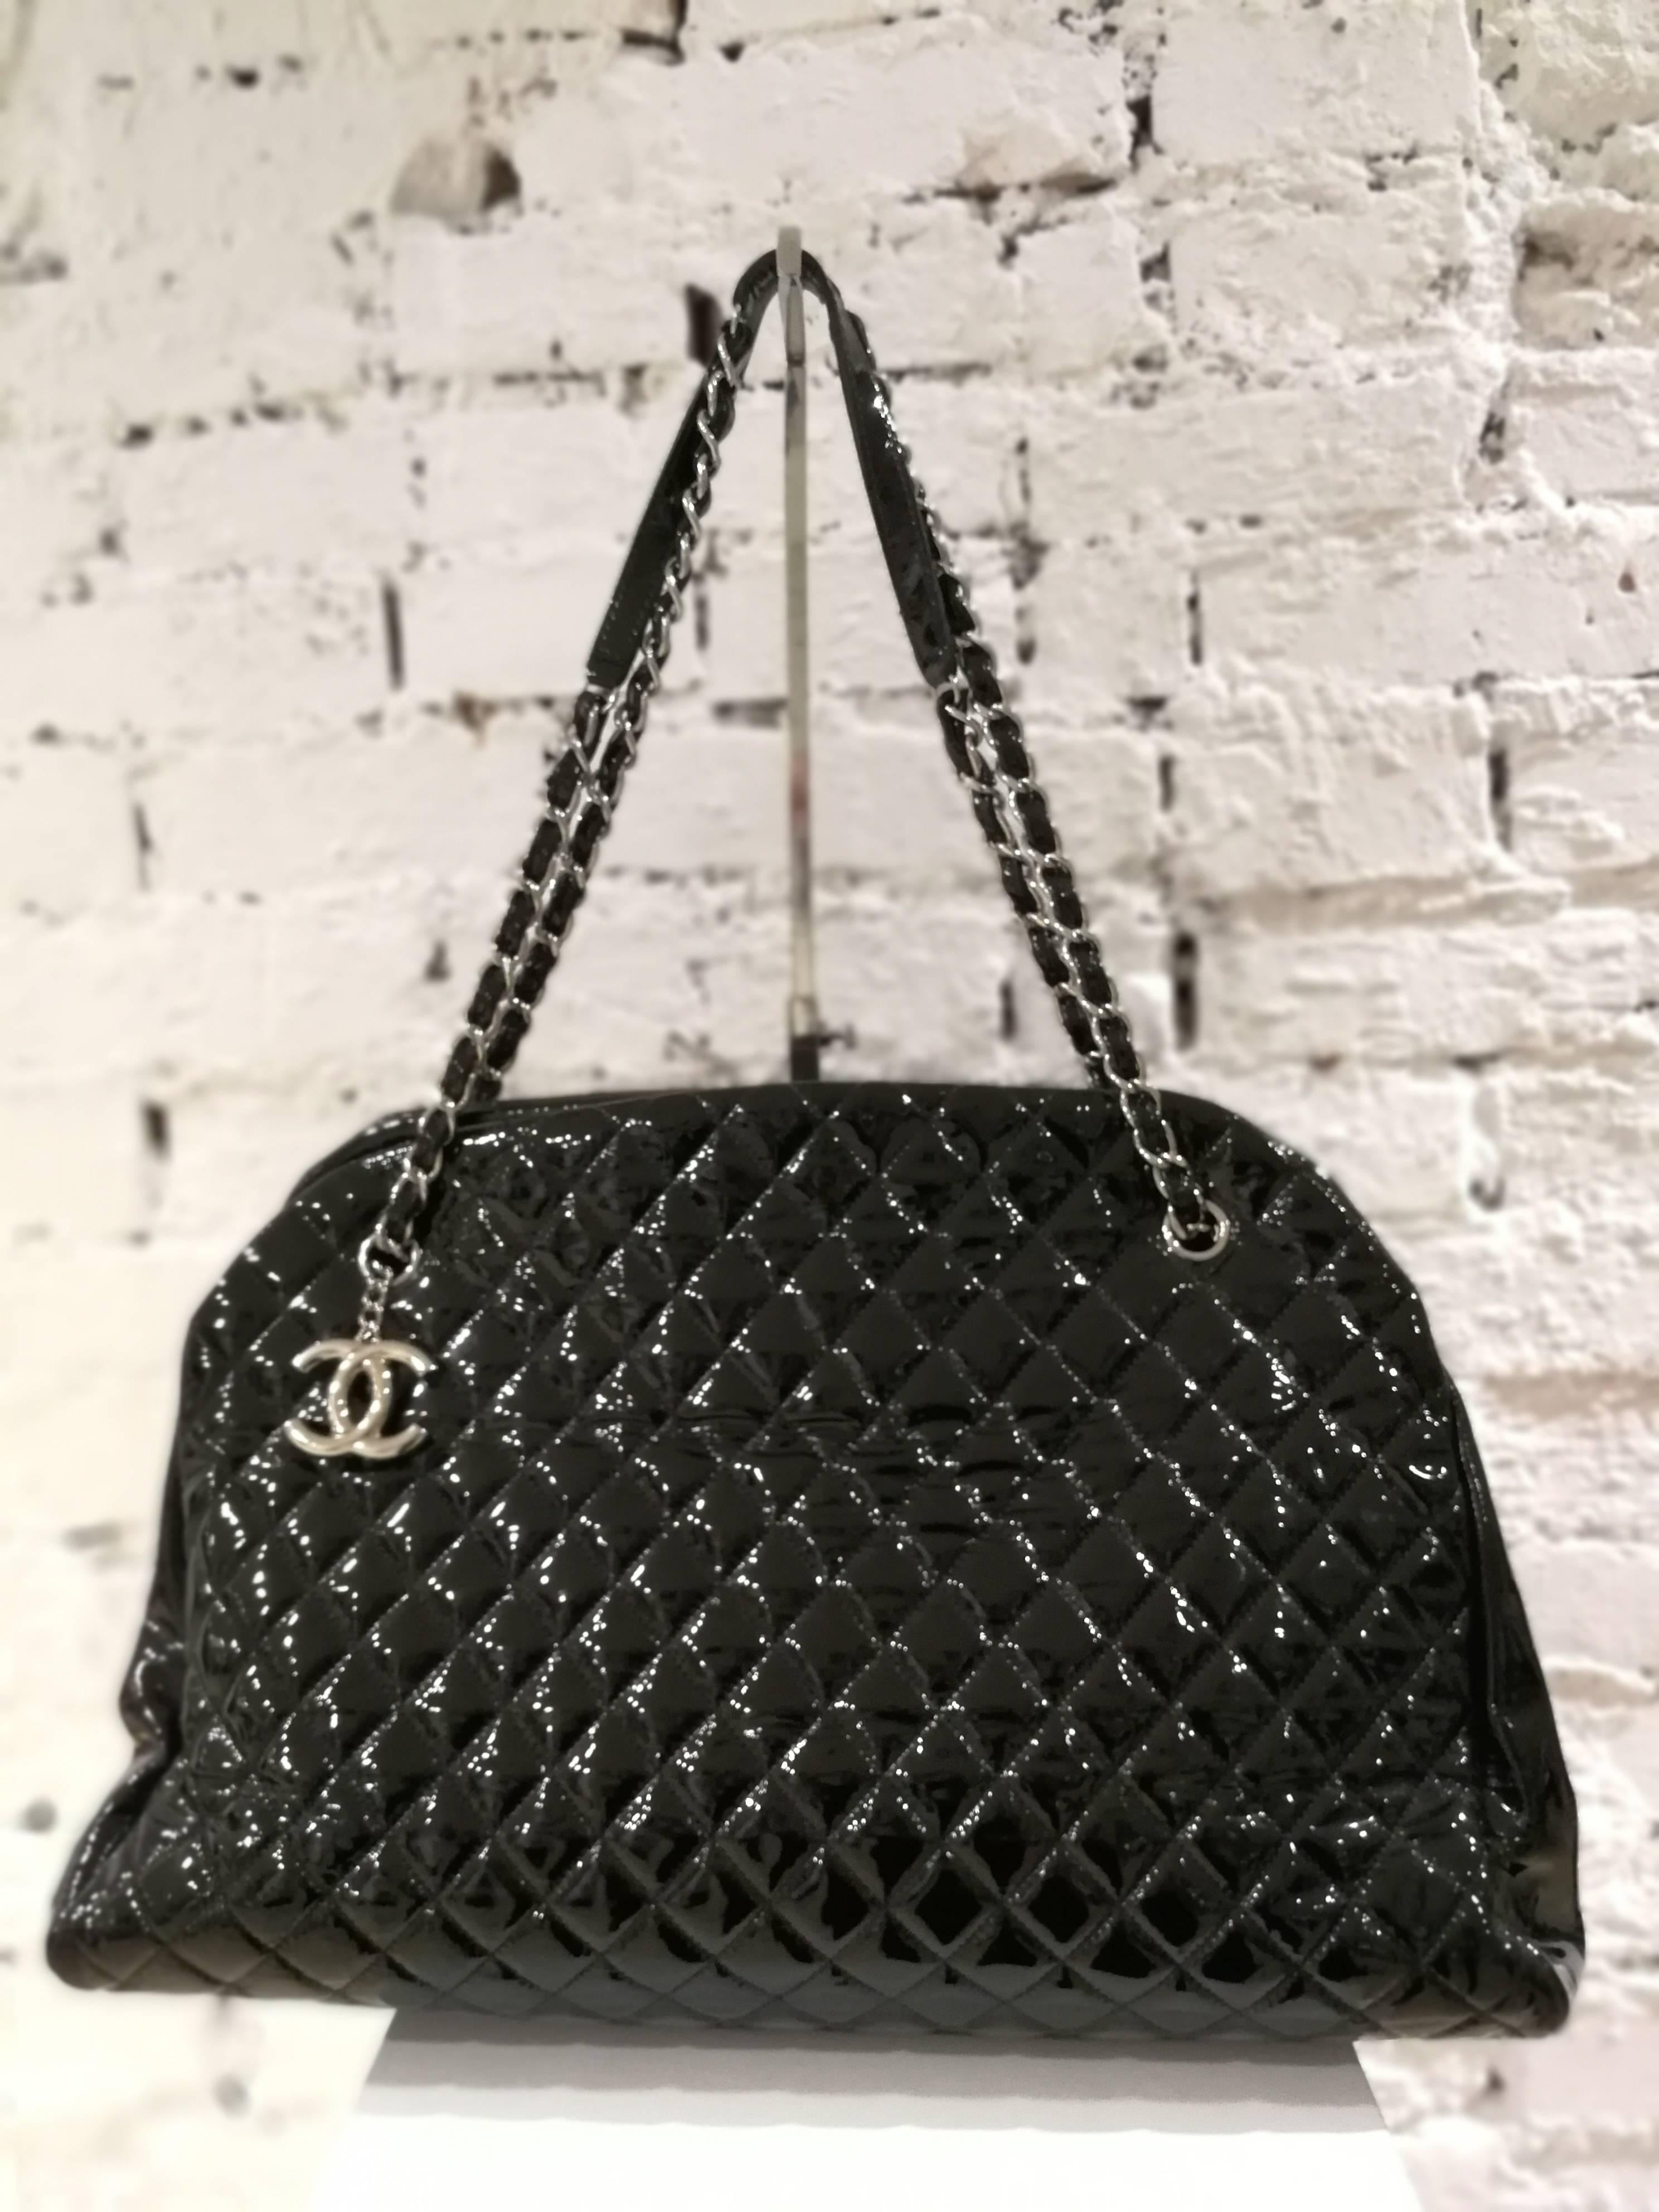 Chanel Just Mademoiselle Bowler Black patent Leather Bag 4